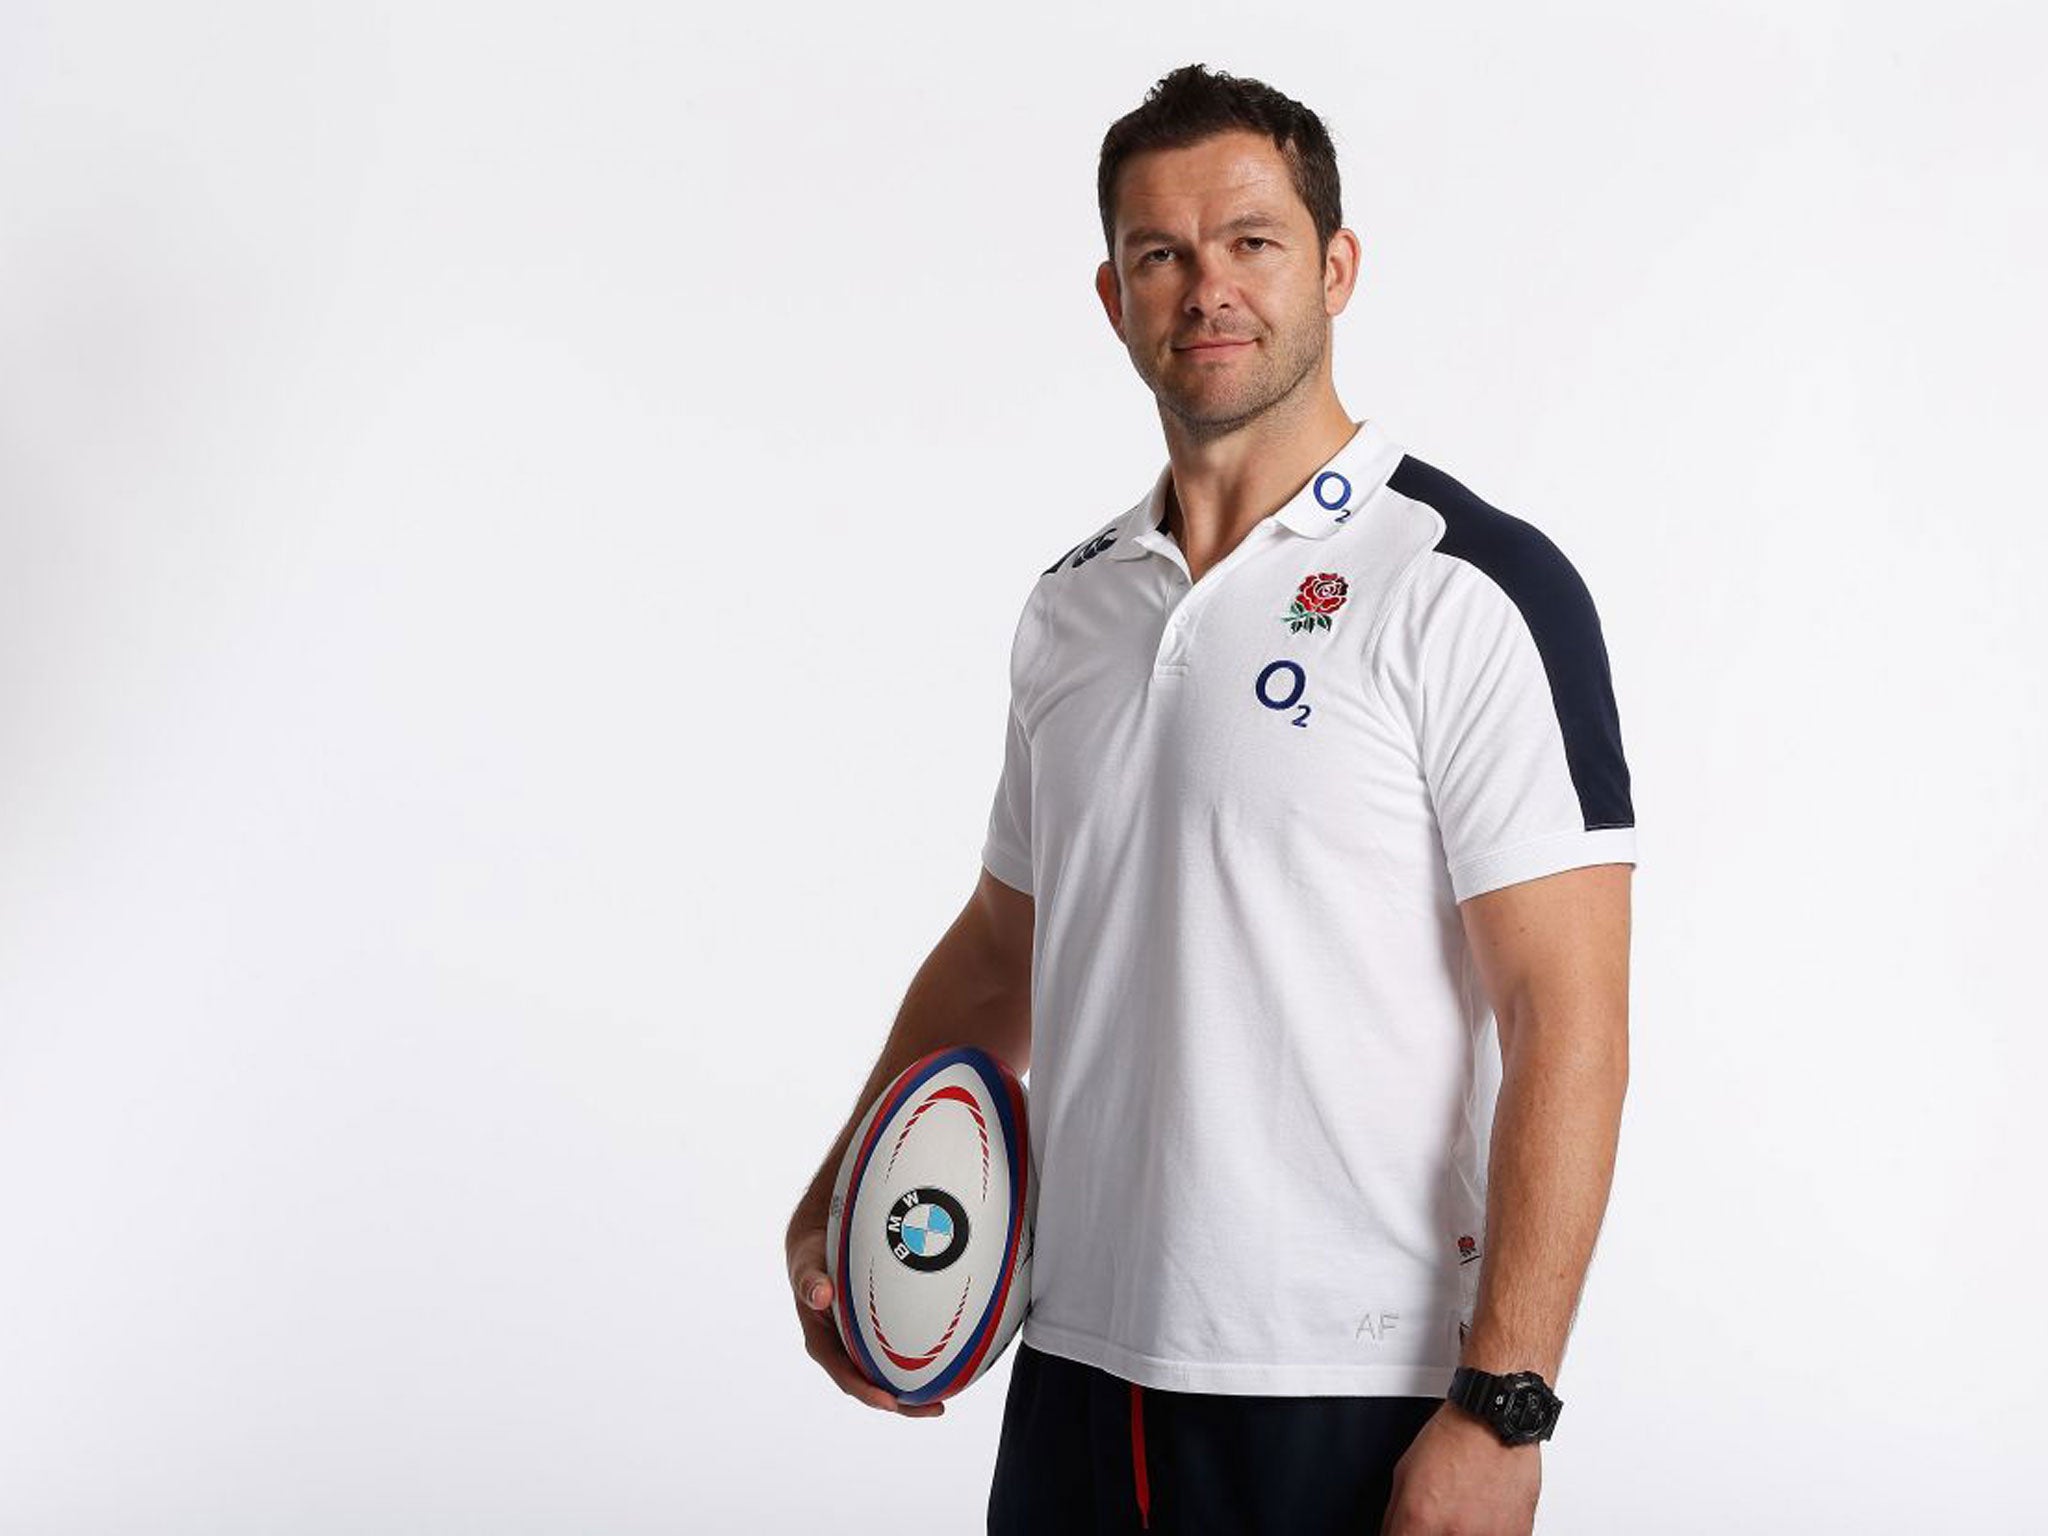 One man who did not disappear was a newcomer, winning only his third cap. His name? Andy Farrell.